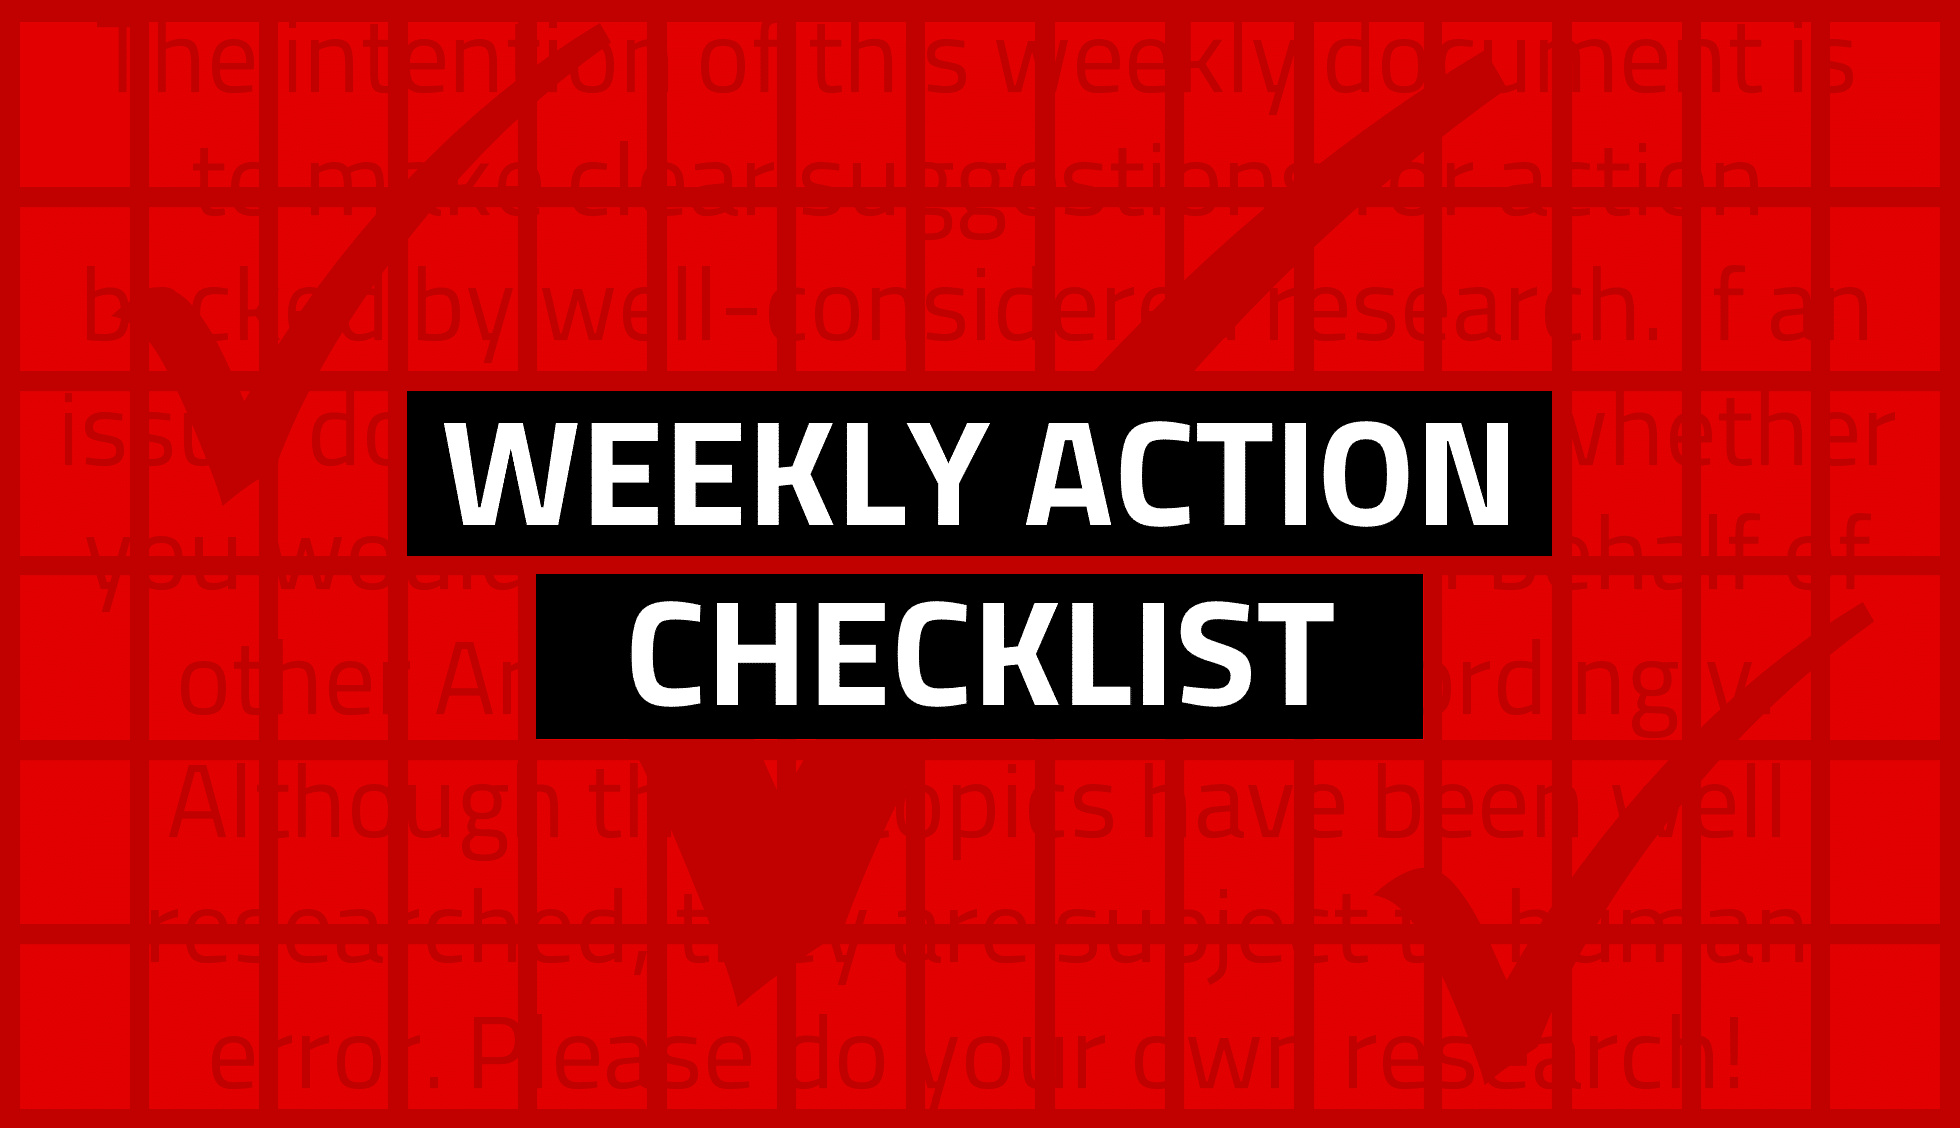 What to Do This Week of June 18, 2017